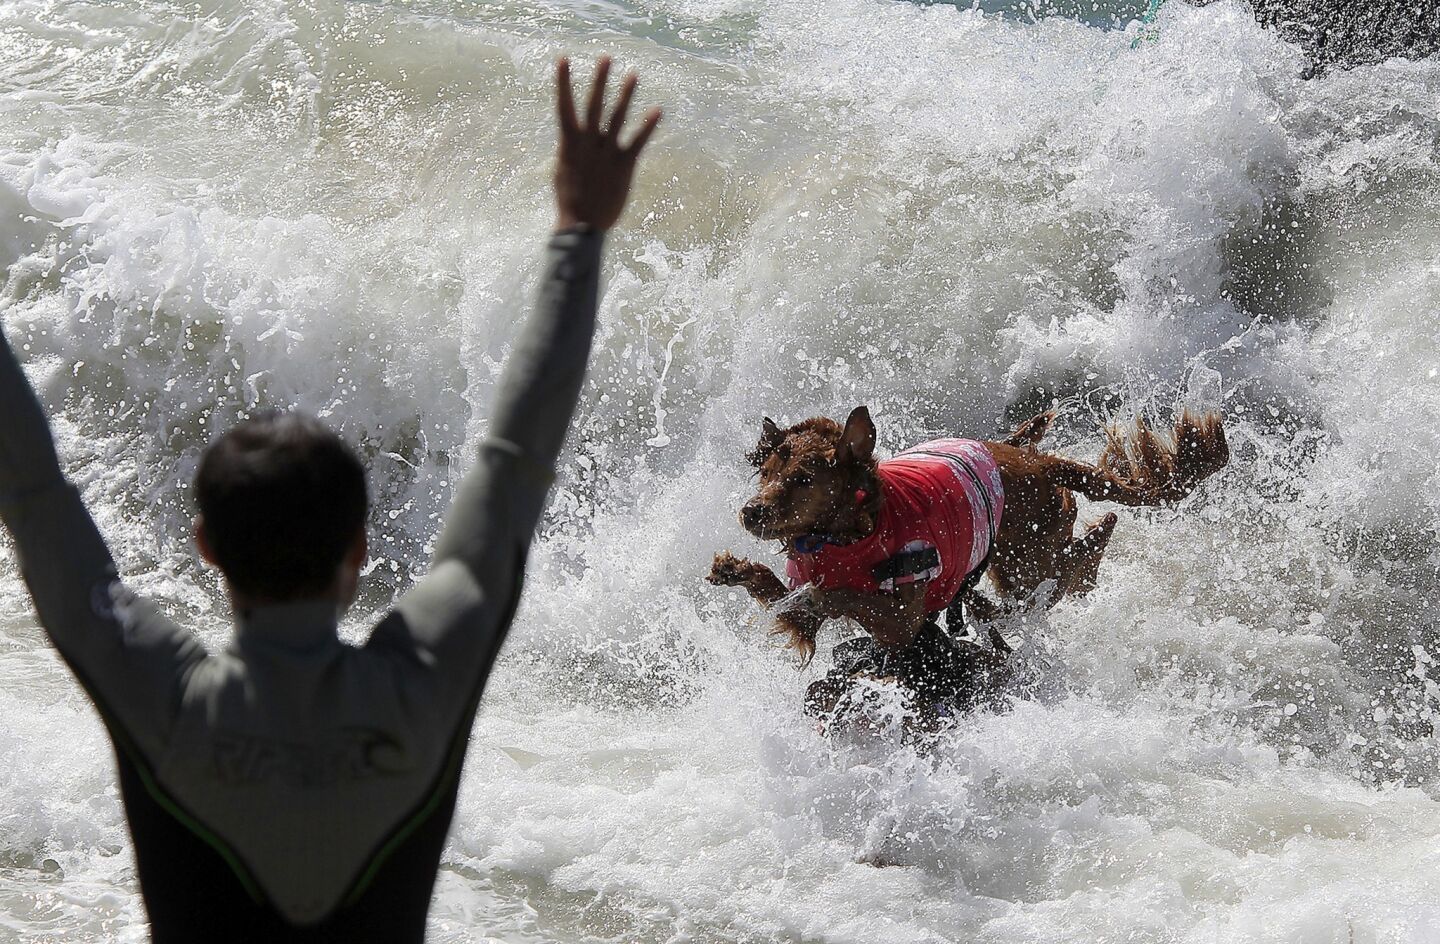 Surfing canine